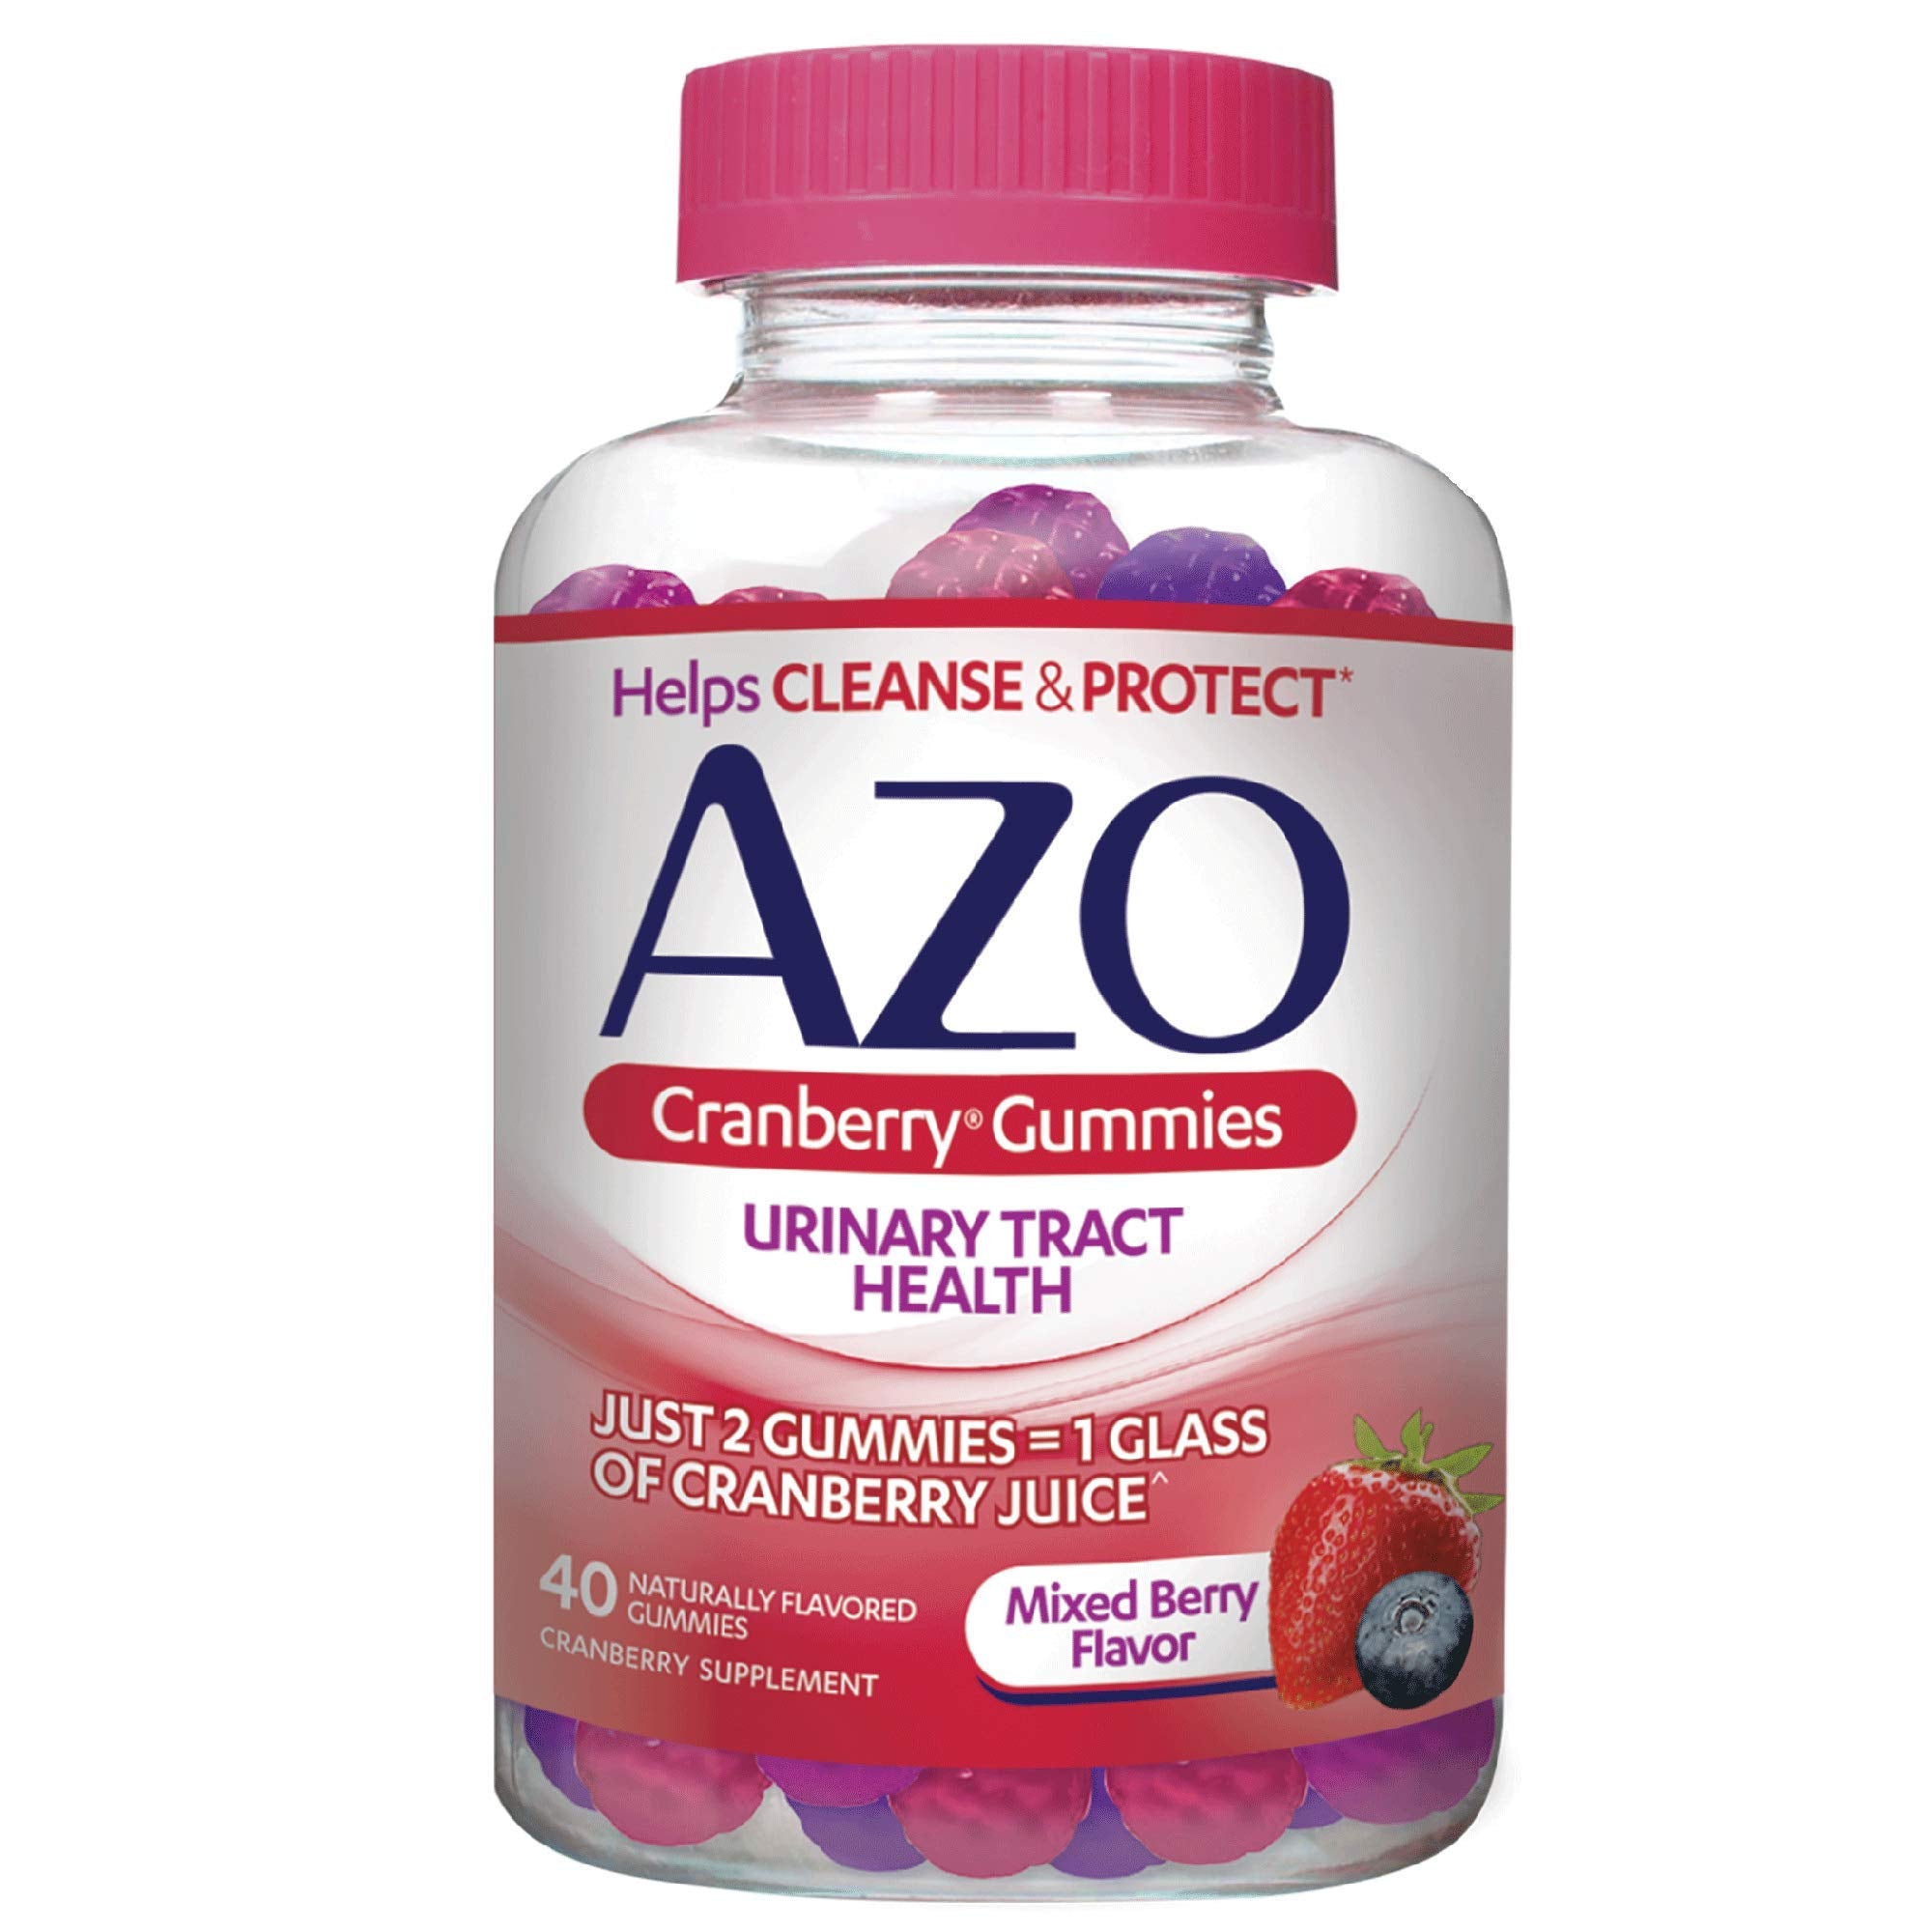 AZO Cranberry Urinary Tract Health Gummies Dietary Supplement 2 Gummies = Glass Cranberry Juice Helps Cleanse Protect Natural Mixed Berry Flavor Gummies, Non-GMO, 40 Count